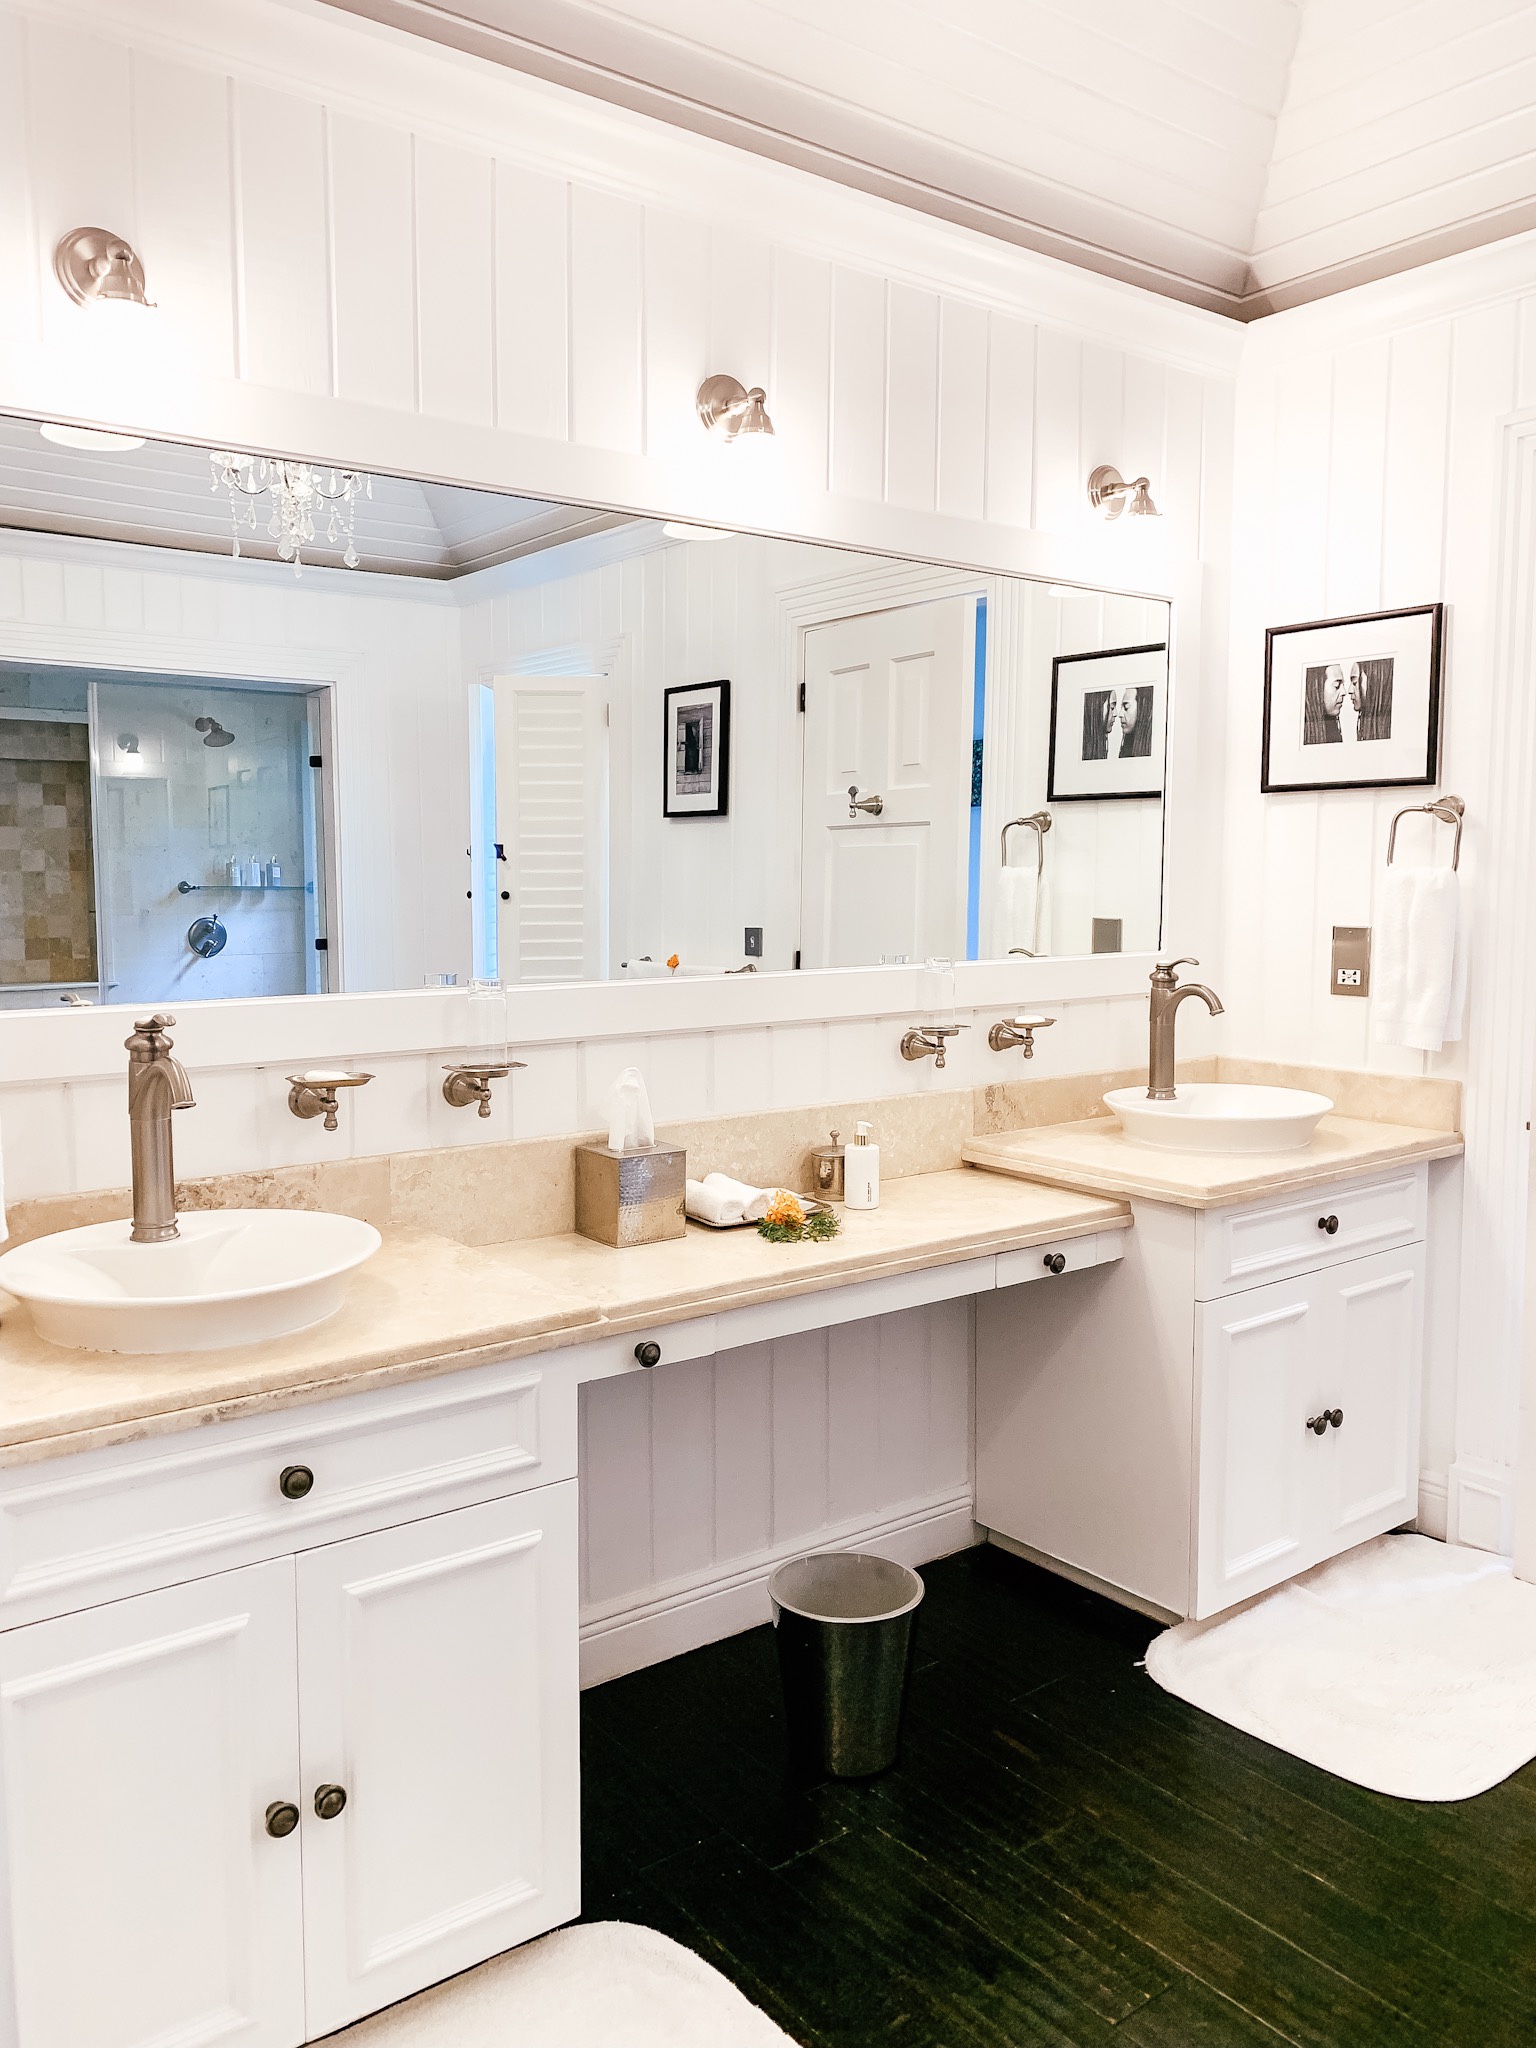 double vanity sinks during your stay at the luxurious resort in the Caribbean